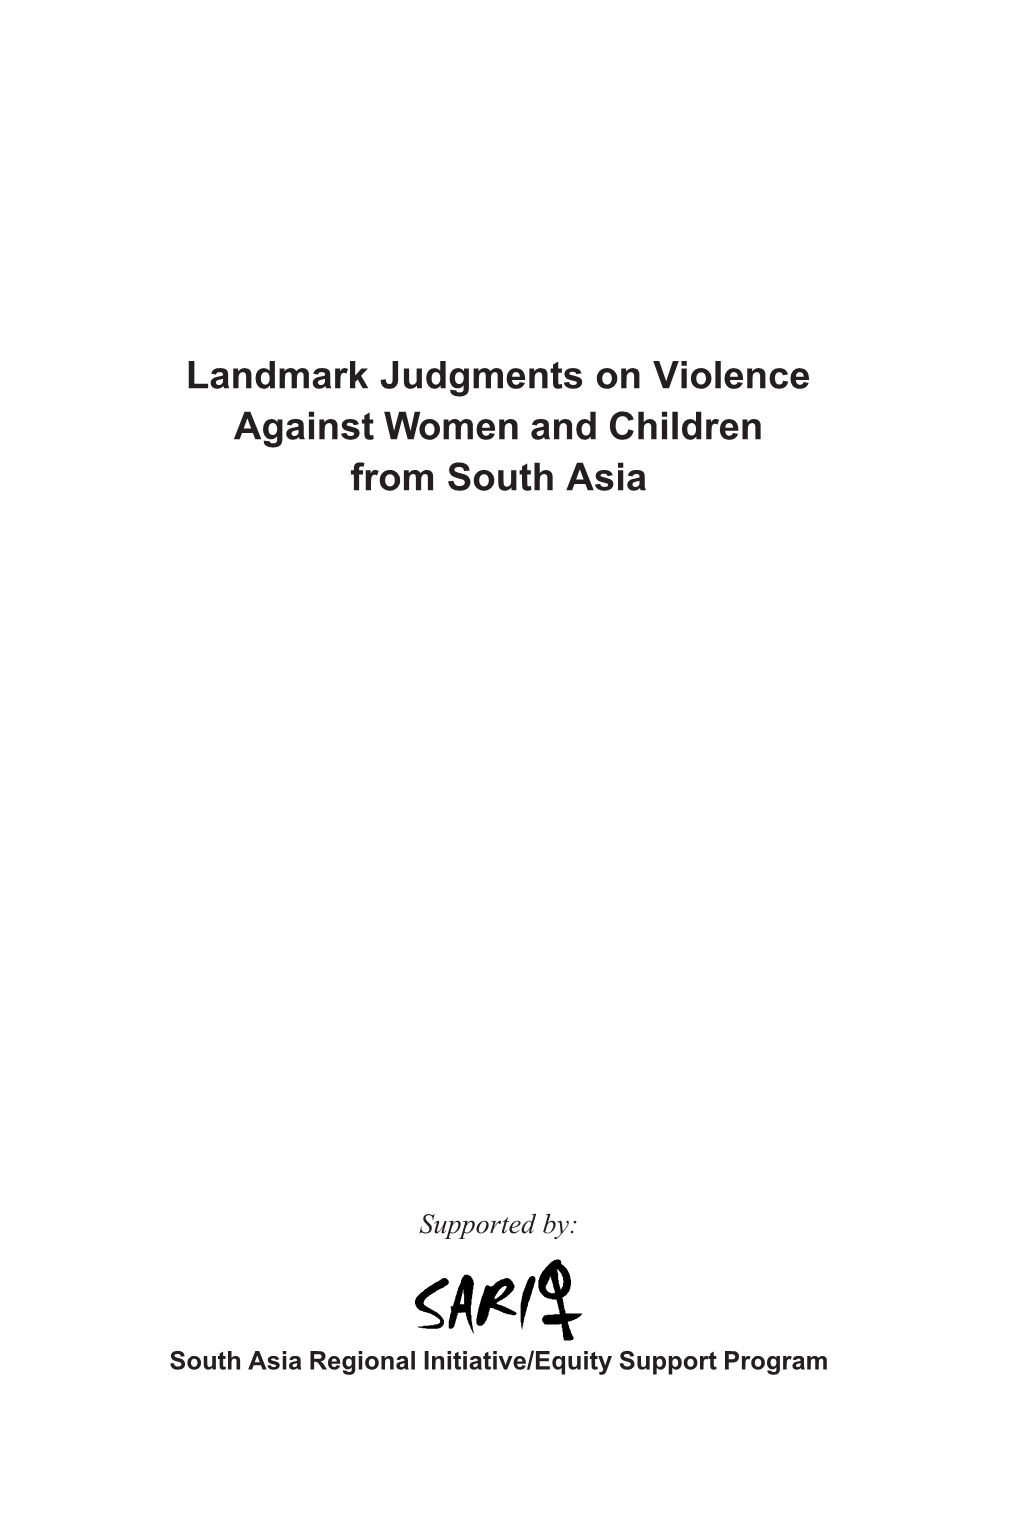 Landmark Judgments on Violence Against Women and Children from South Asia